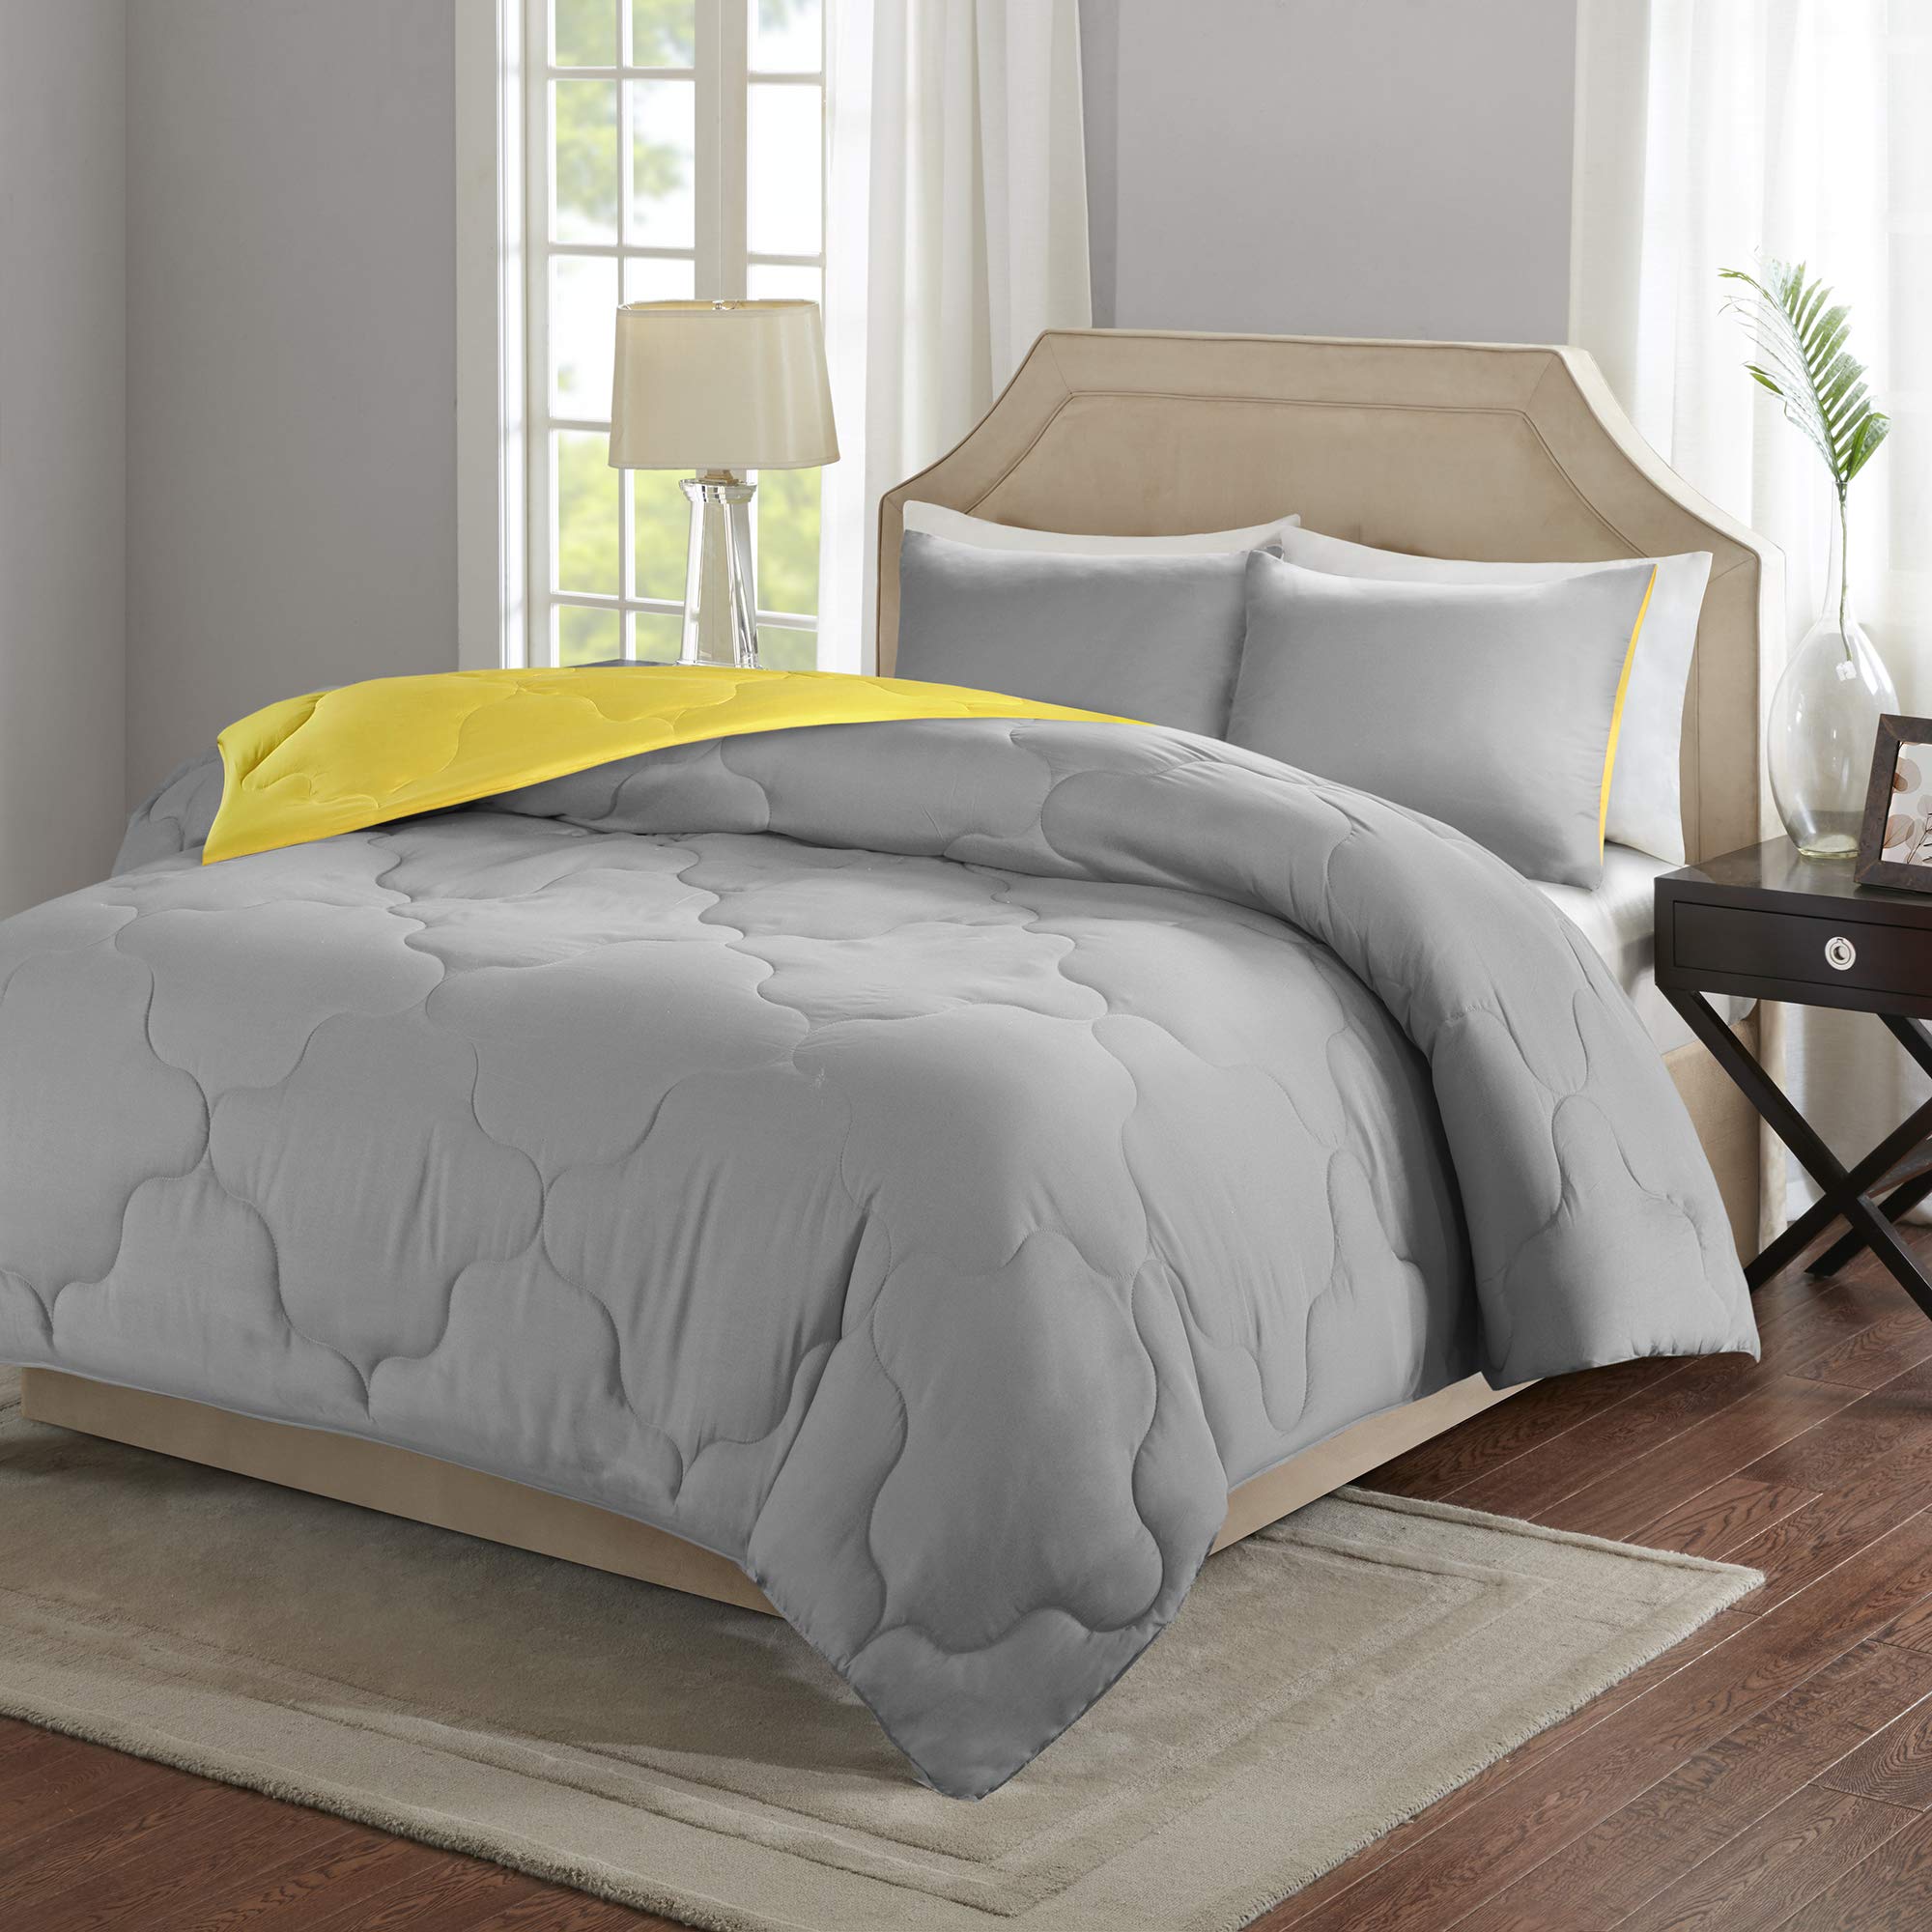 Book Cover Comfort Spaces Vixie Reversible Comforter Set - Trendy Casual Geometric Quilted Cover, All Season Down Alternative Cozy Bedding, Matching Sham, Grey/Yellow, Full/Queen 3 piece Grey/Yellow Full/Queen